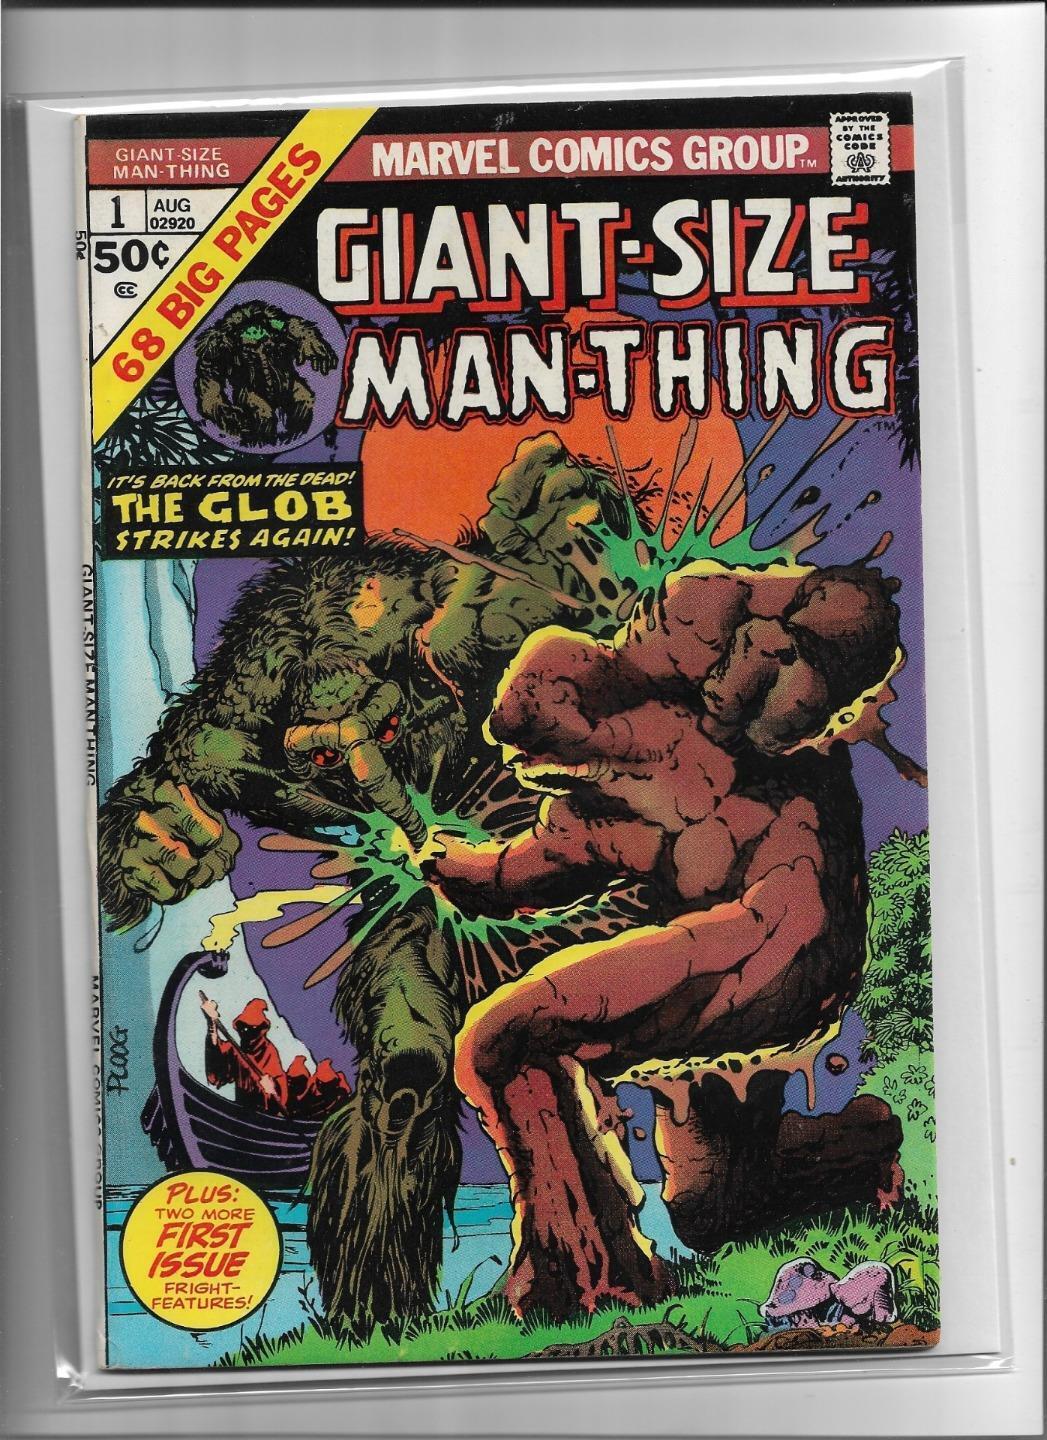 GIANT-SIZE MAN-THING #1 1974 VERY FINE 8.0 4327 THE GLOB